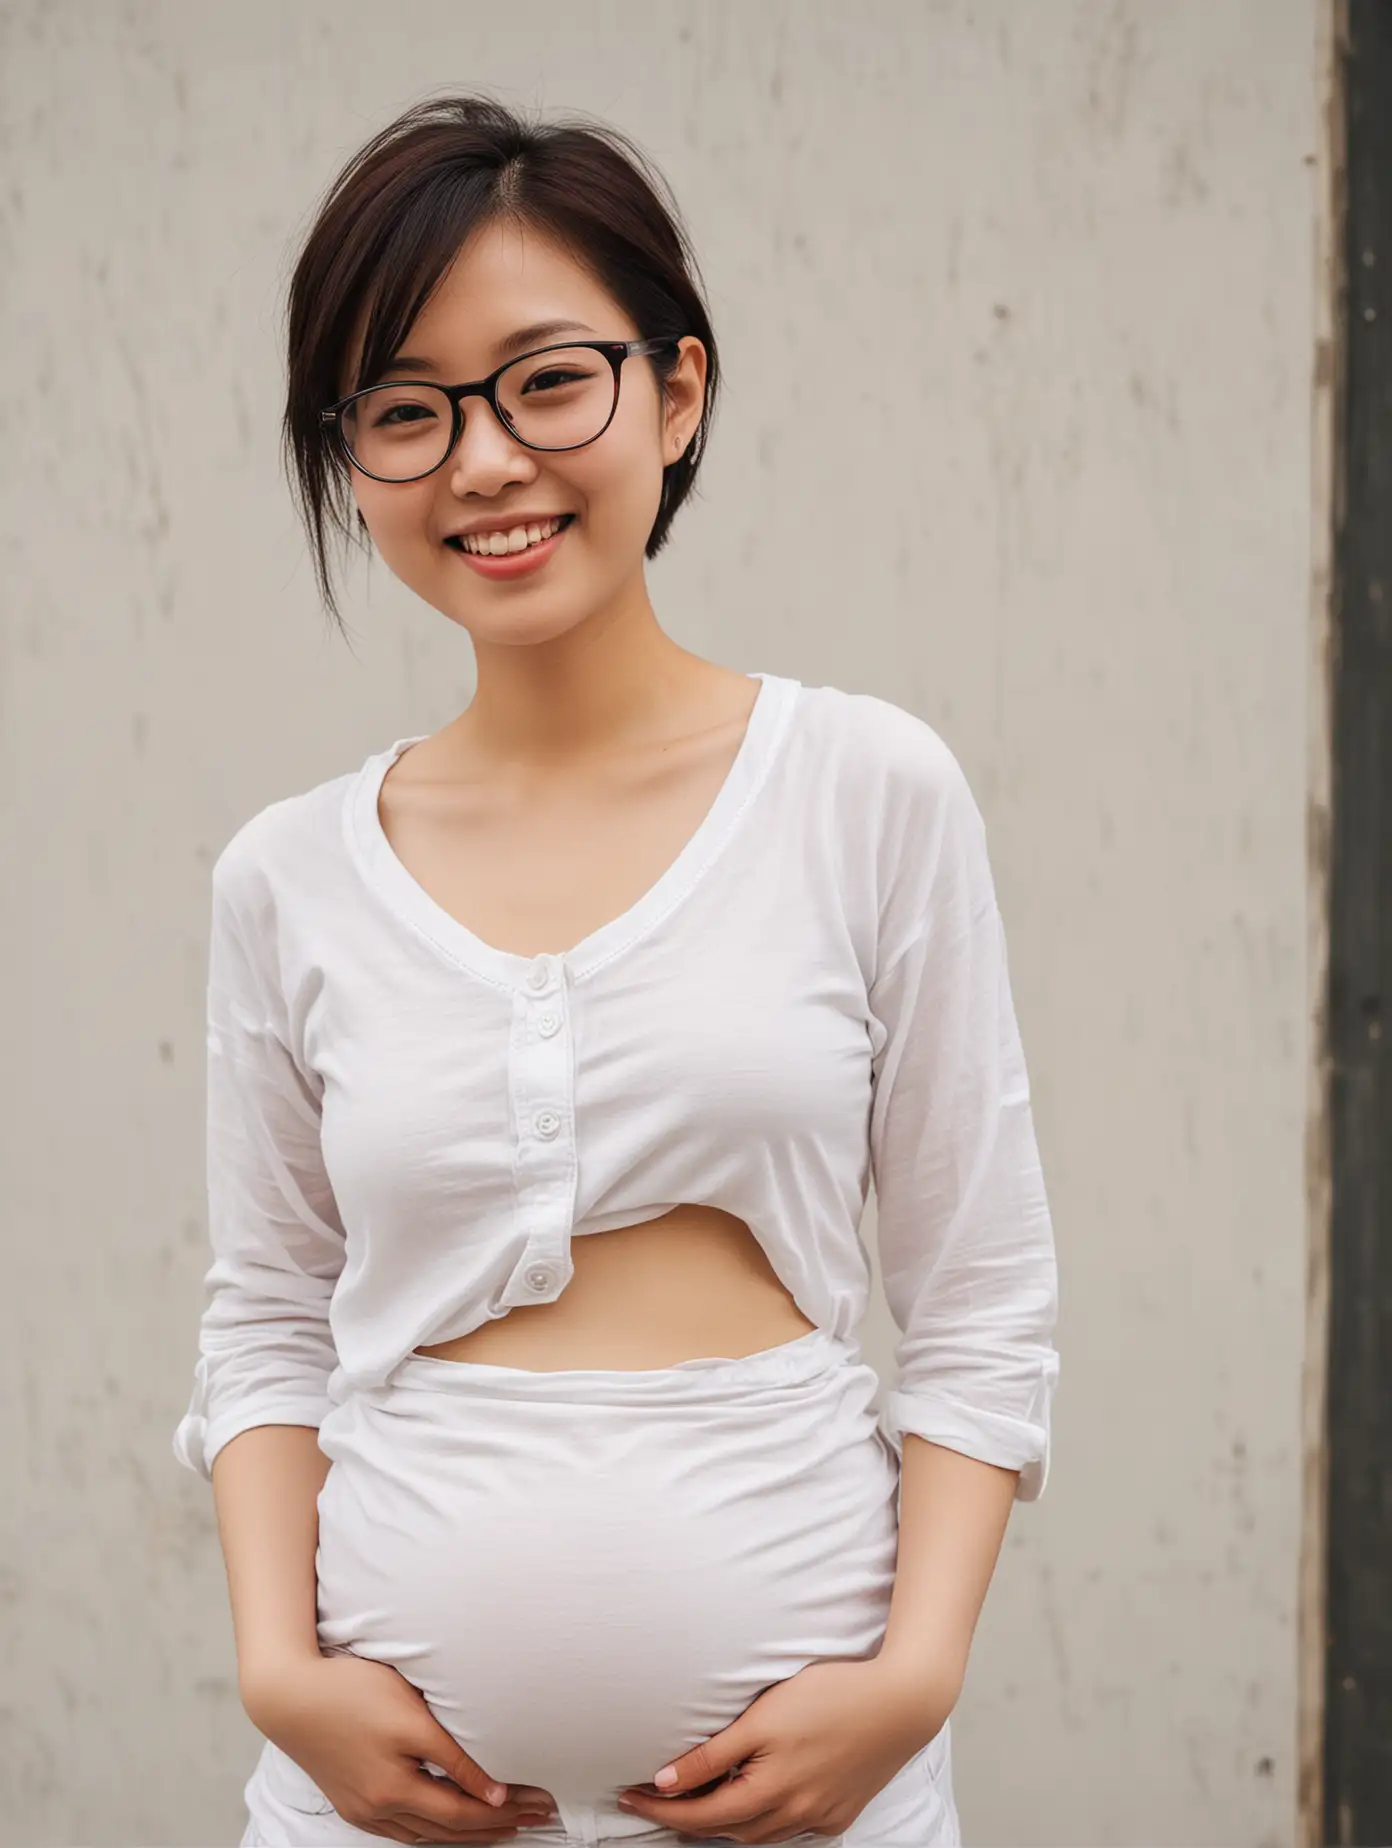 Pregnant-Chinese-Woman-in-White-Dress-and-Glasses-Smiling-in-Profile